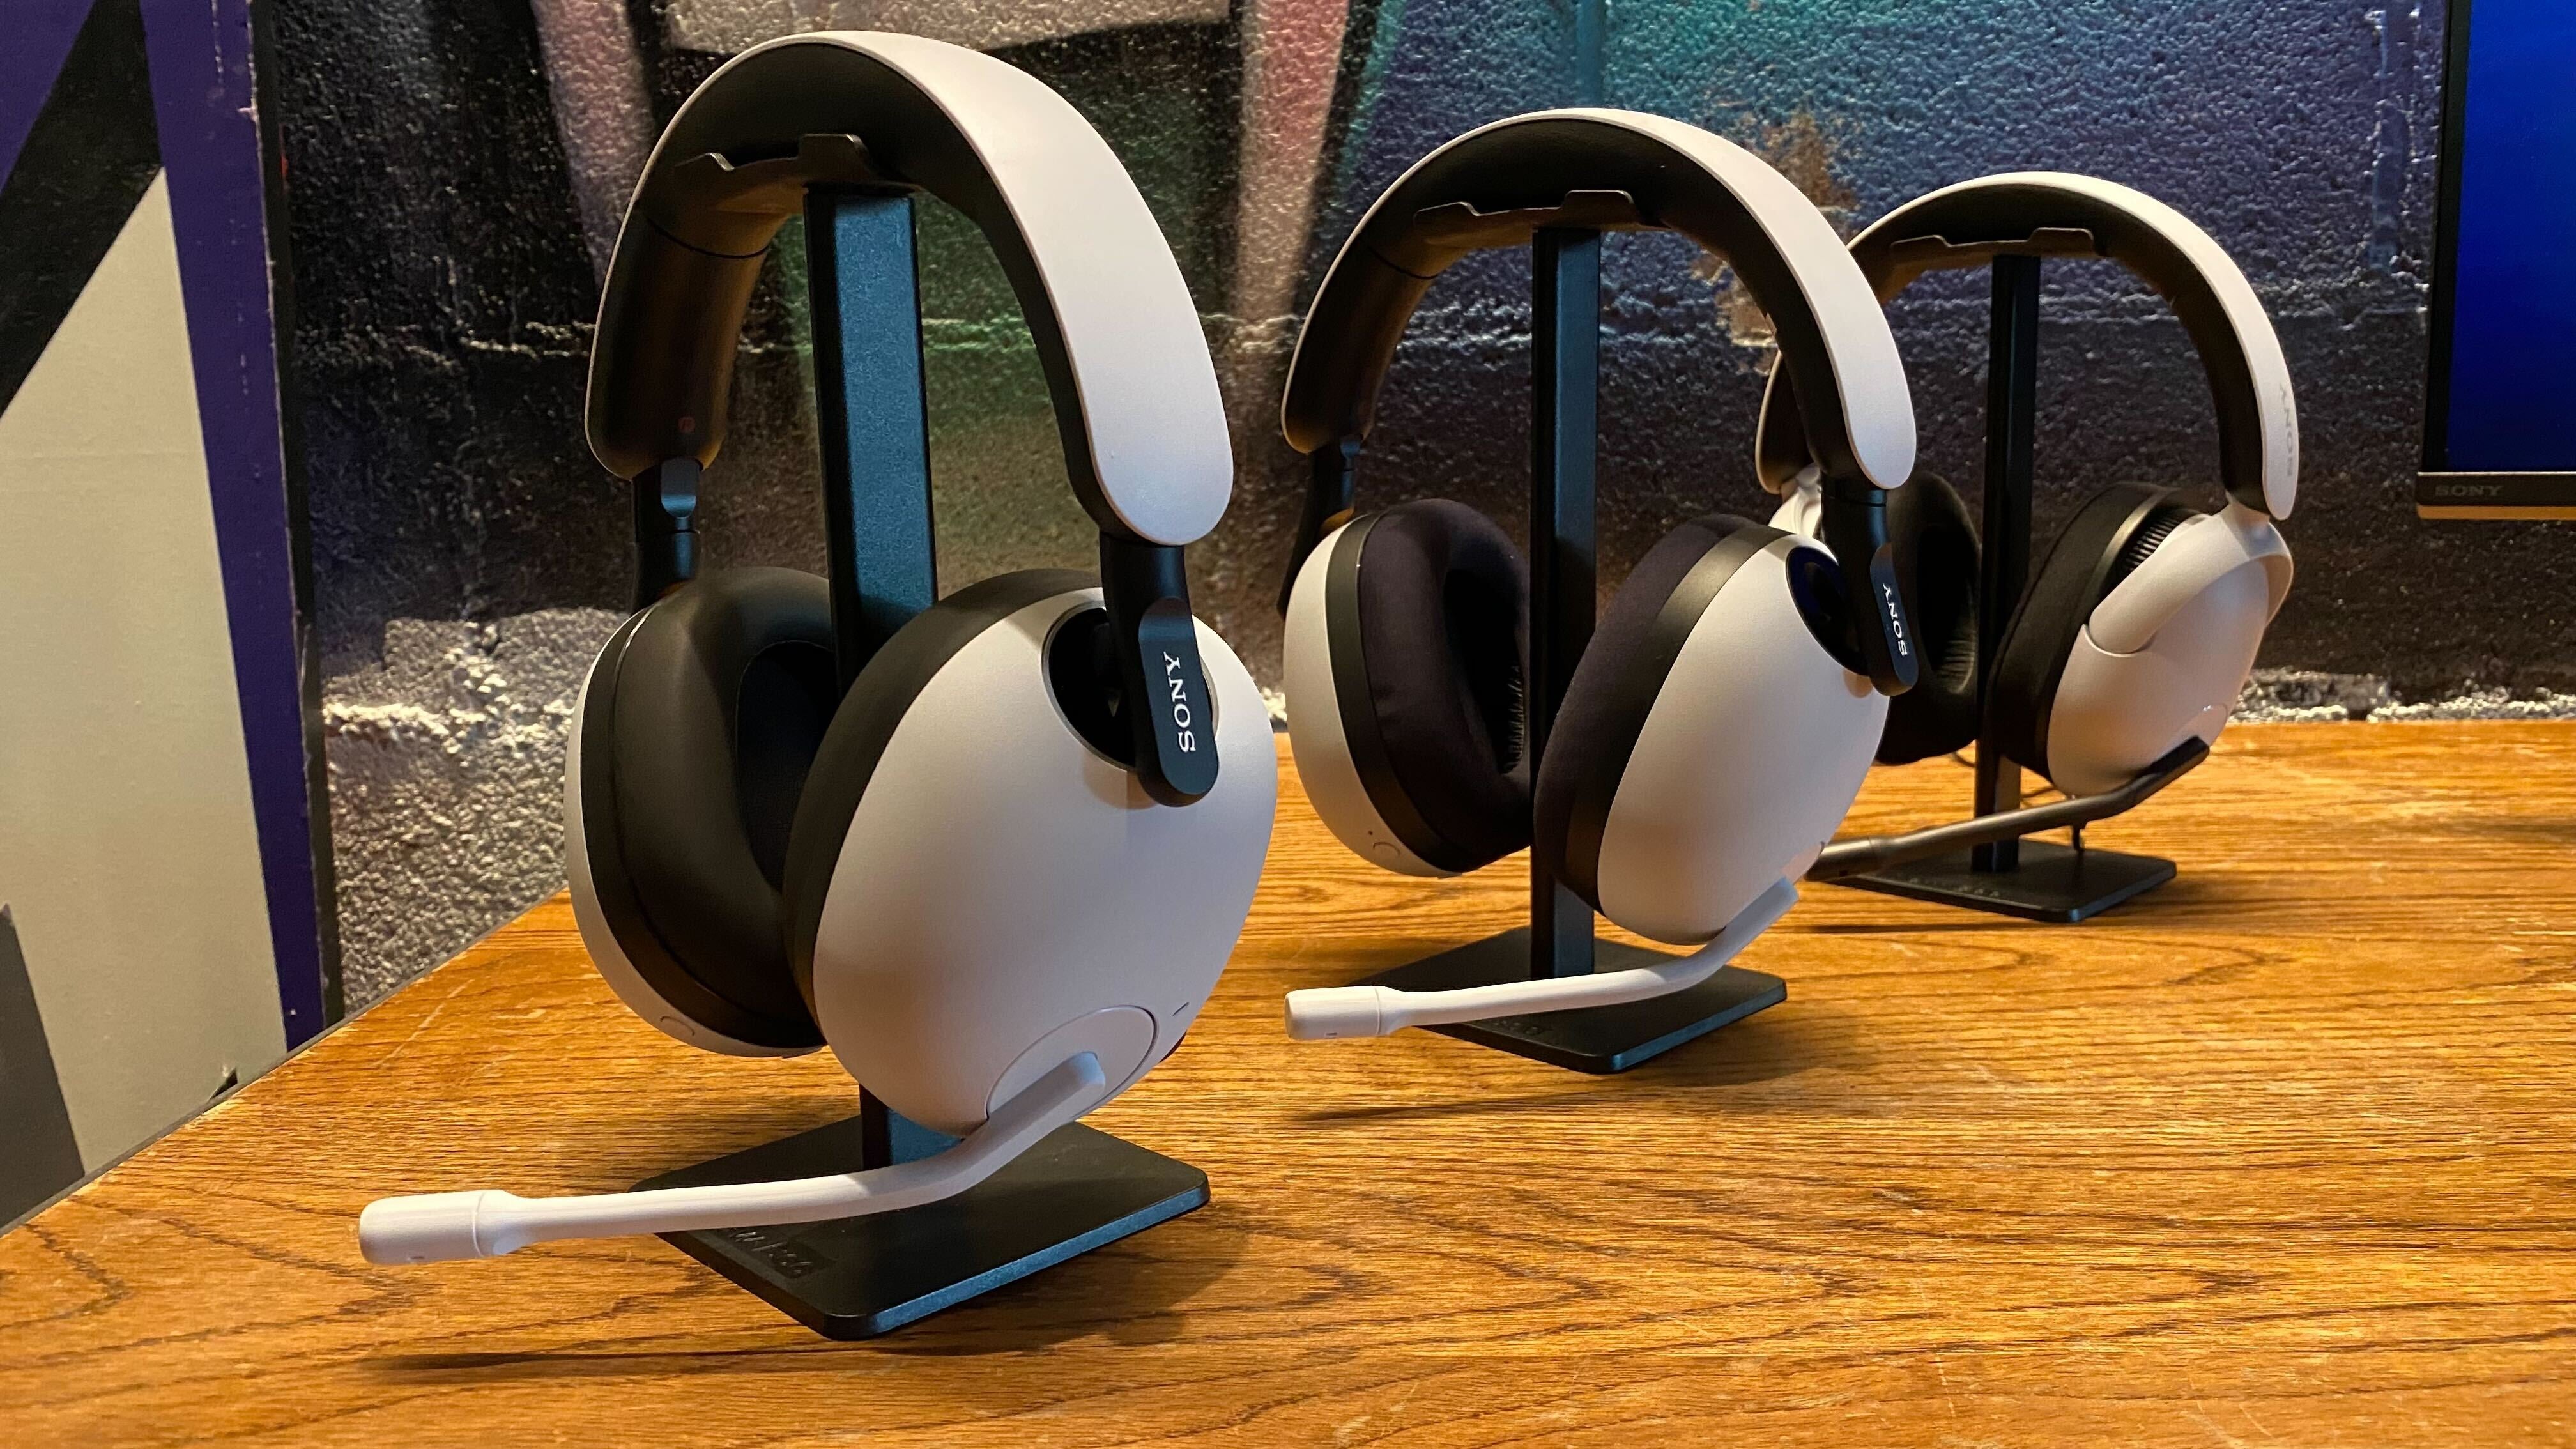 The Sony Inzone H9, H7, and H3 headsets sitting next to each other (Photo: Michelle Ehrhardt/Gizmodo)